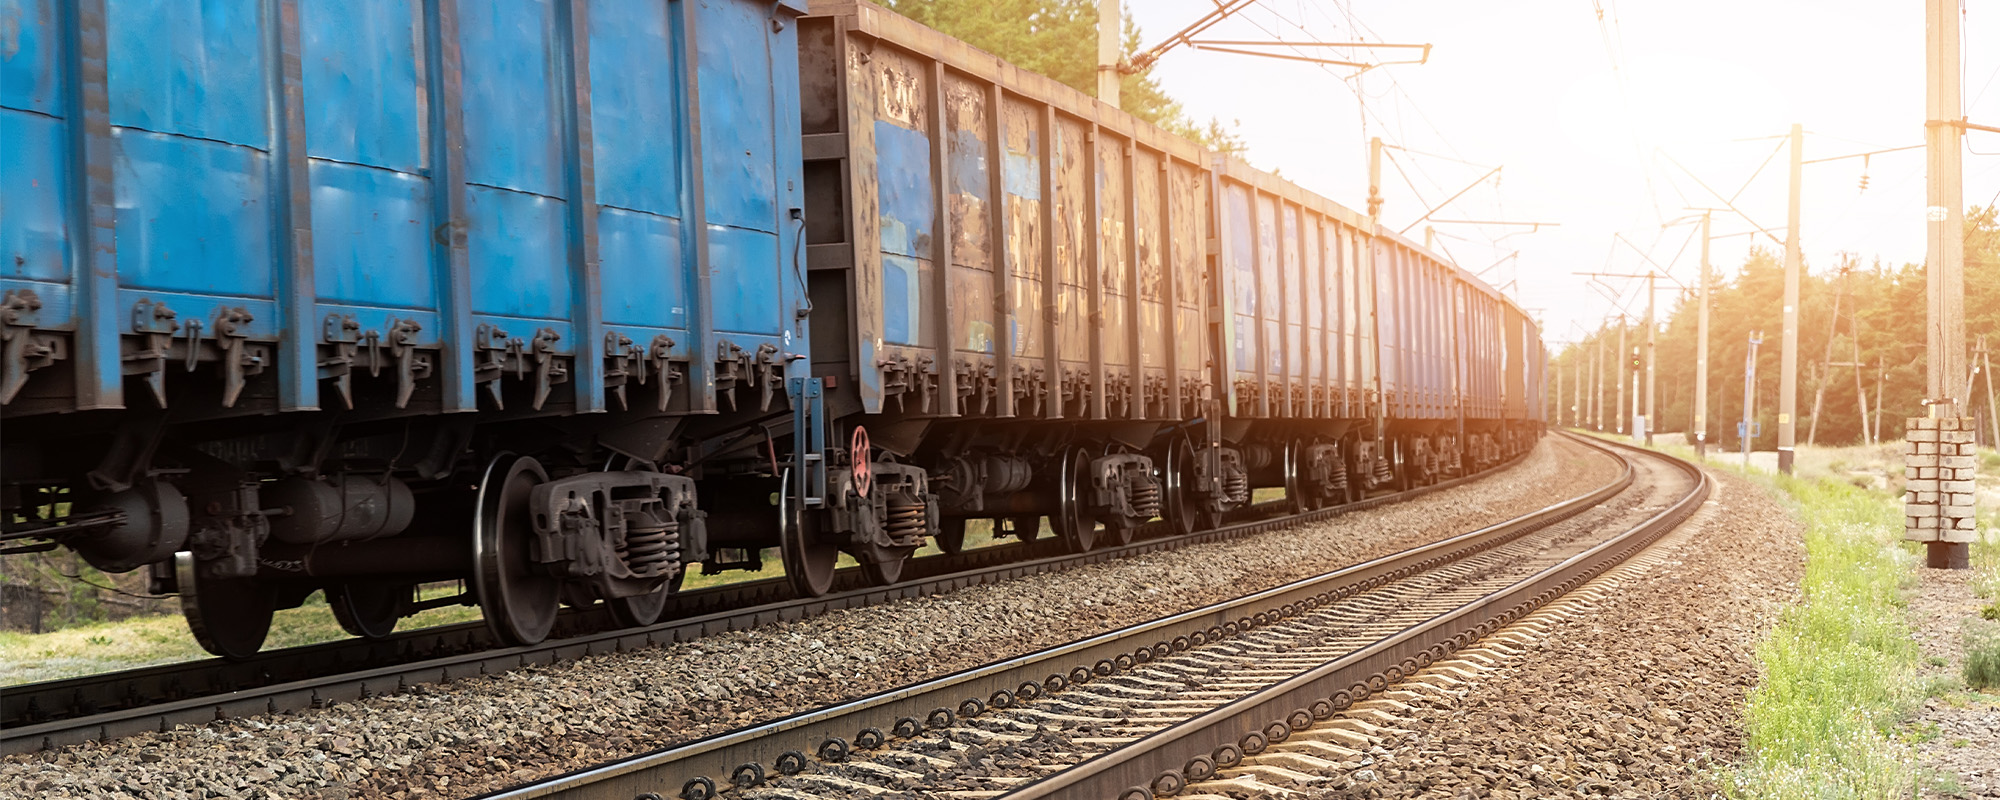 Heavy cargo freight rusty train wagons moving on railway on sunset or sunrise day time Industrial materials transportation and goods delivery concept Old rusty wagons moving by rail